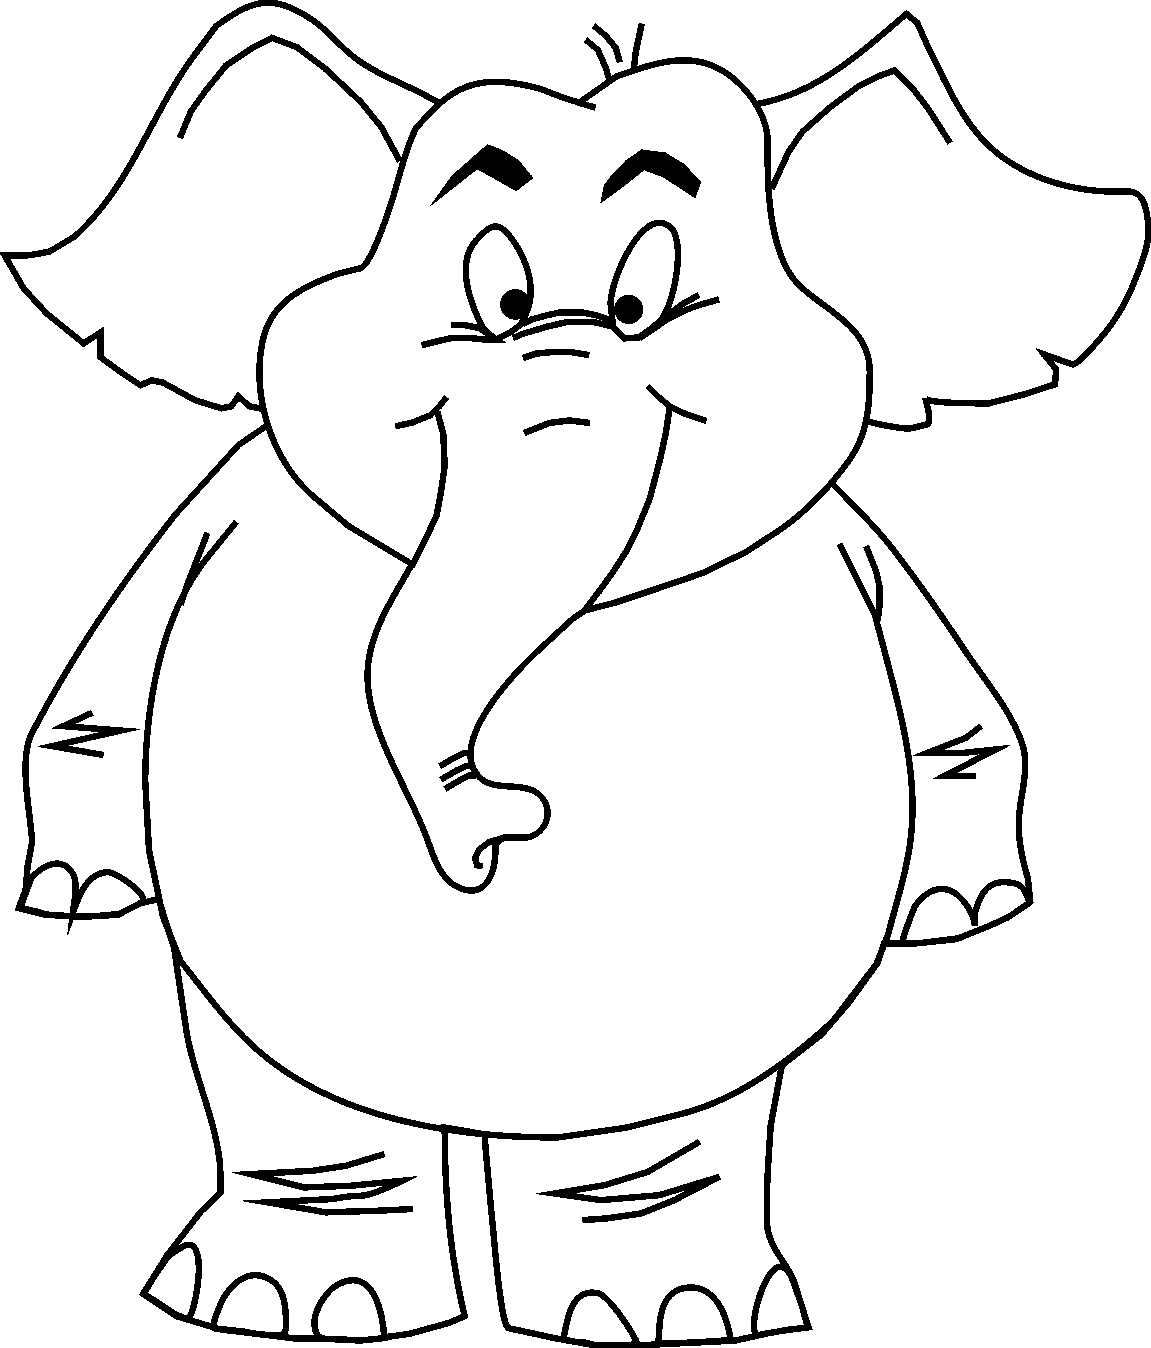 Printable Coloring Pages Cartoon Animals - High Quality Coloring Pages